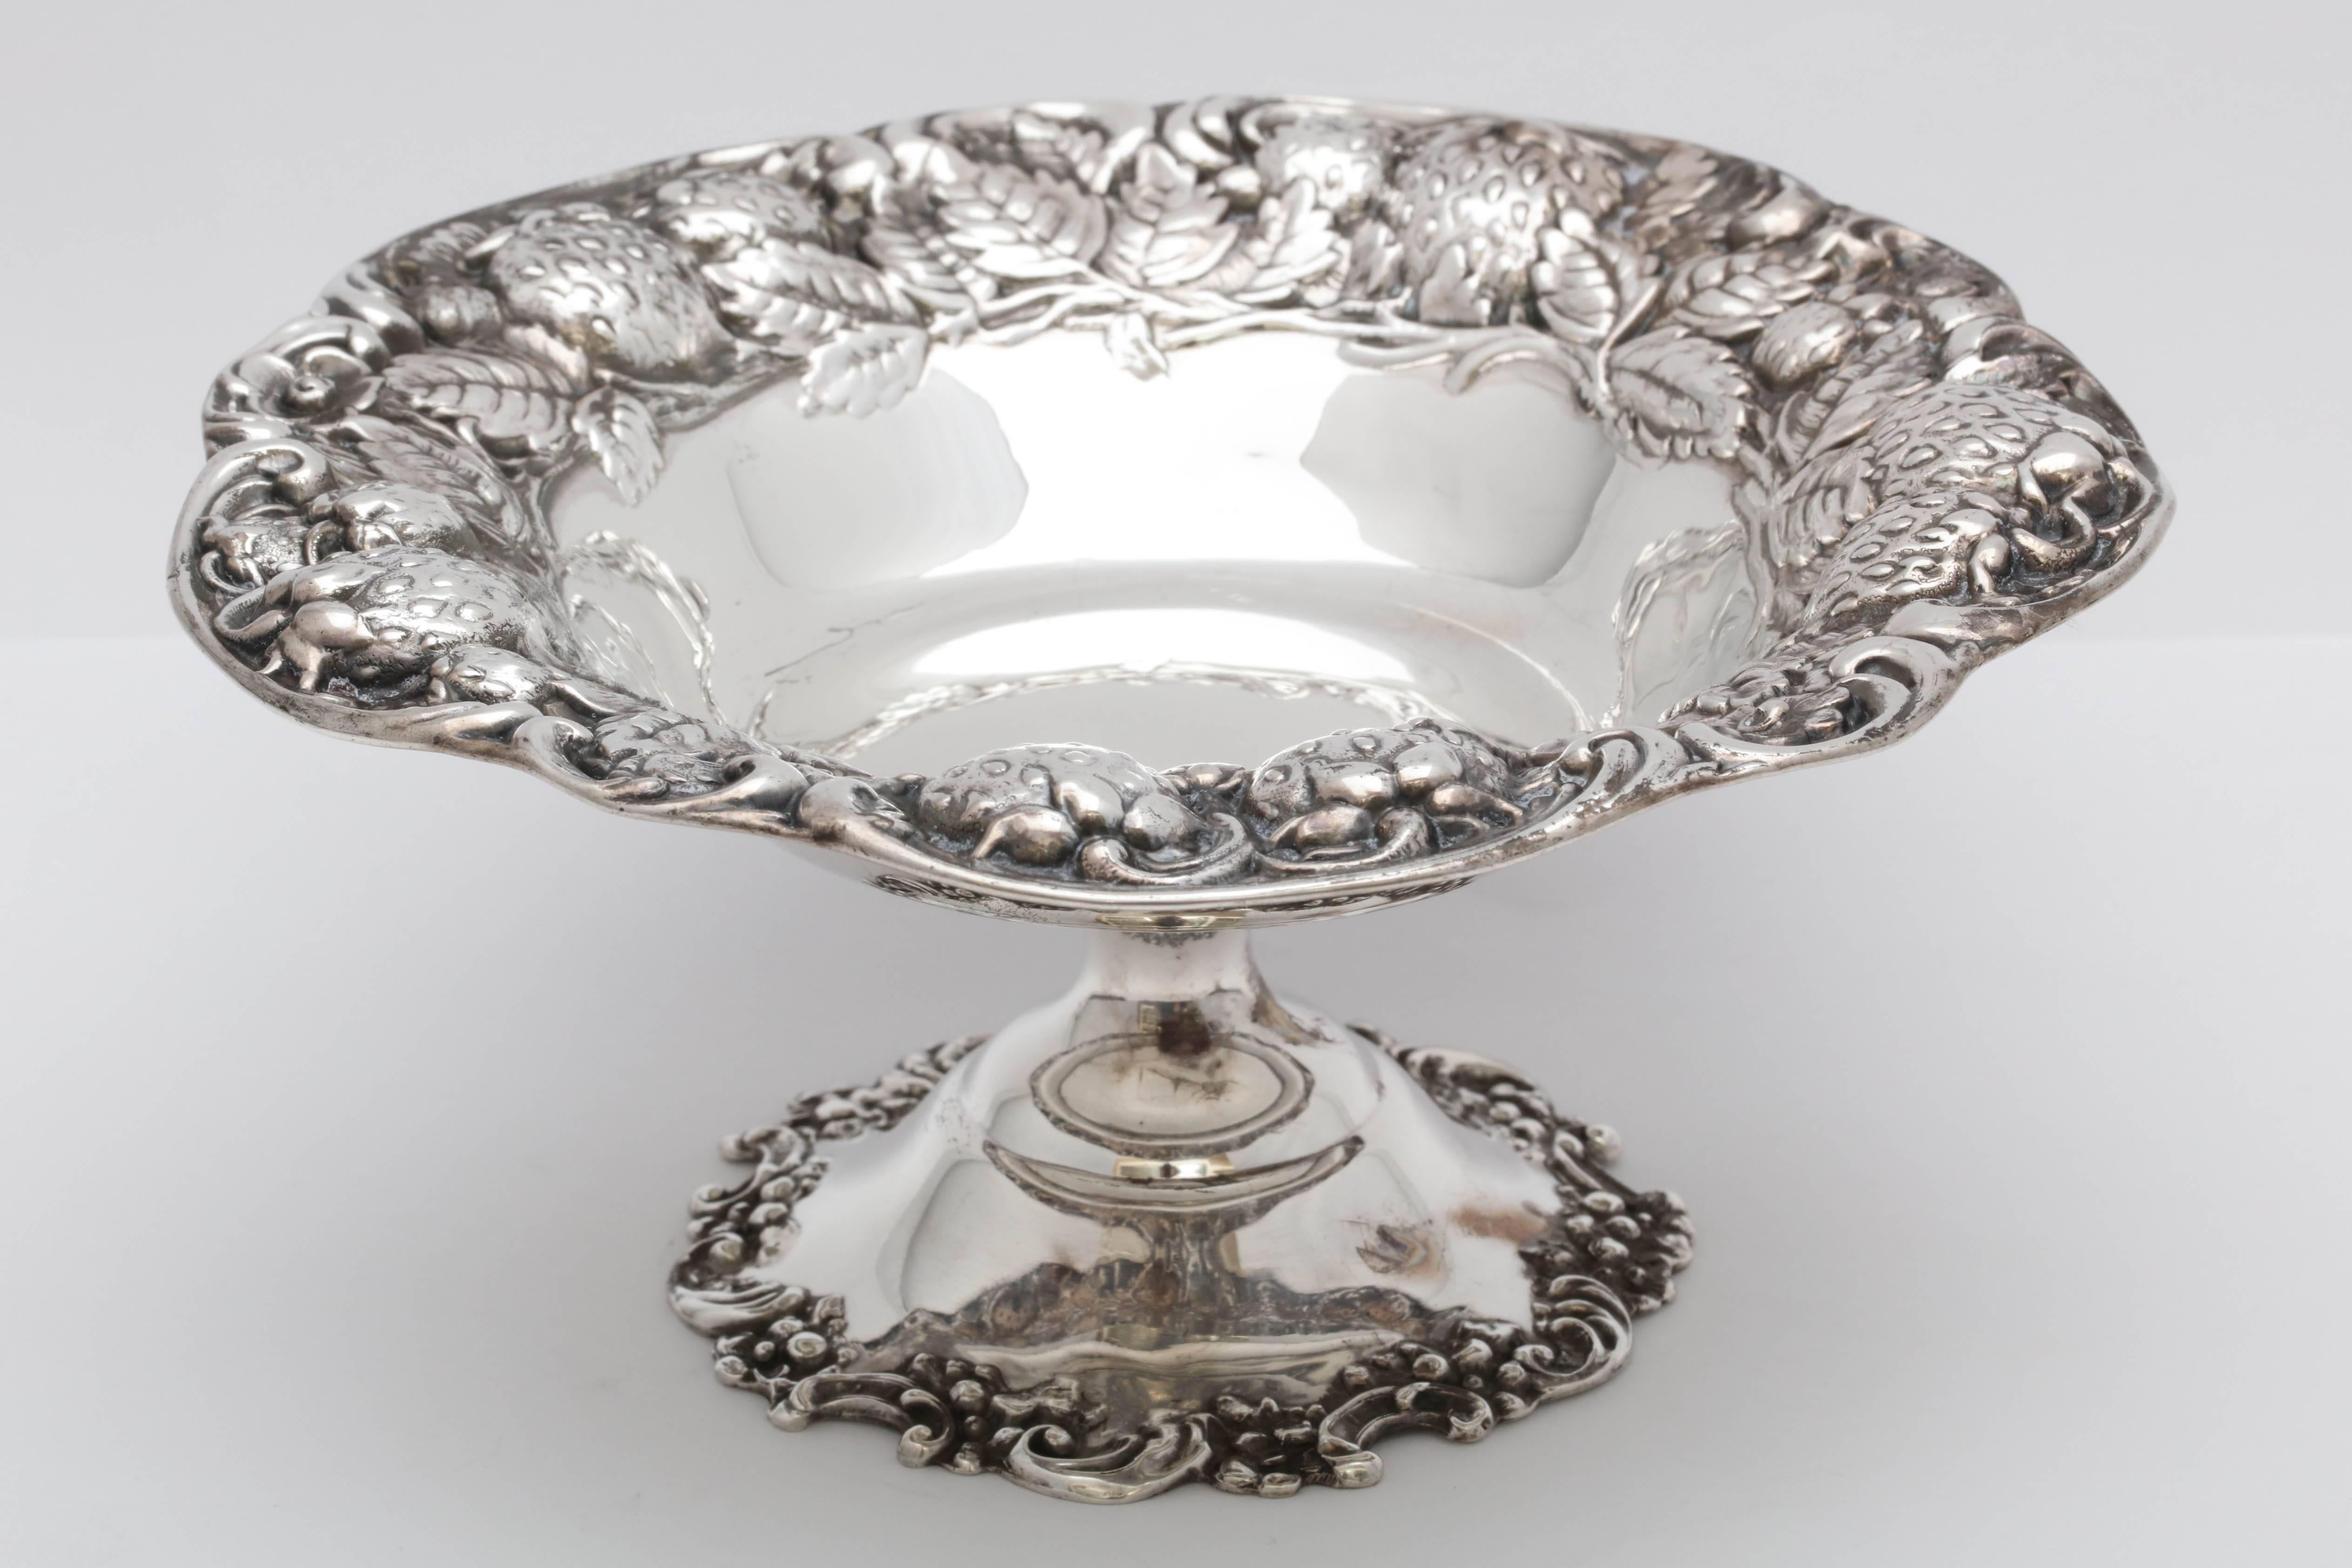 Lovely, Art Nouveau, sterling silver, strawberry compote dish on pedestal base, Mauser Mfg. Co., New York, circa 1895-1910. Designed with blown out strawberries and leaves along upper edge. Measures 3 inches high x 6 1/2 inches in diameter. Weighs